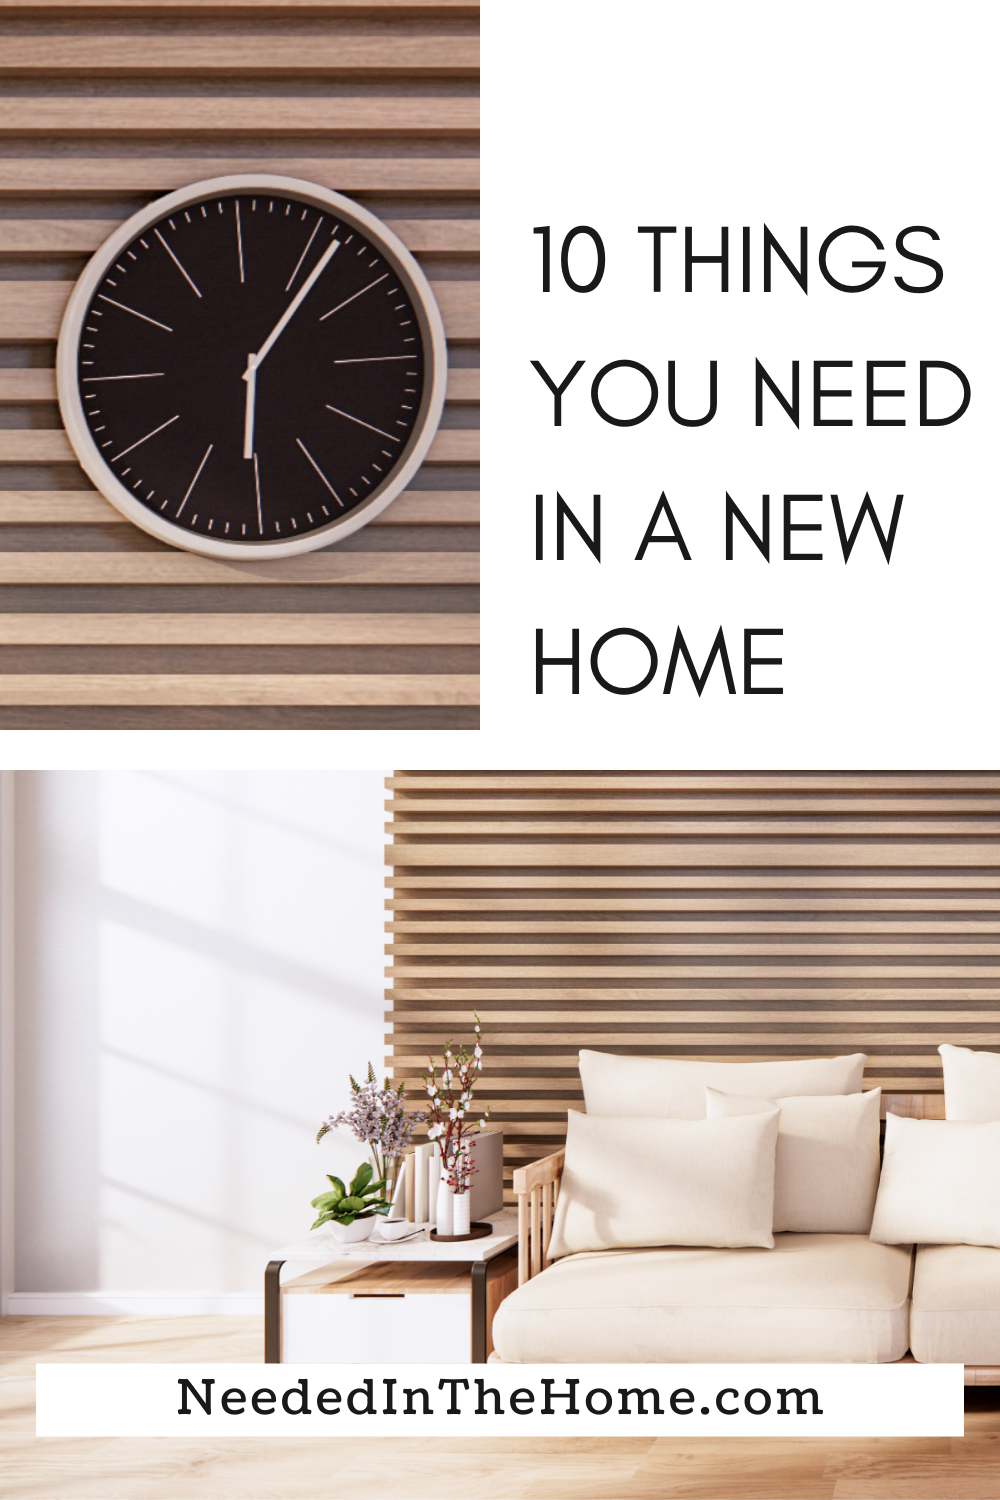 pinterest-pin-description 10 things you need in a new home clock living room decor sofa neededinthehome